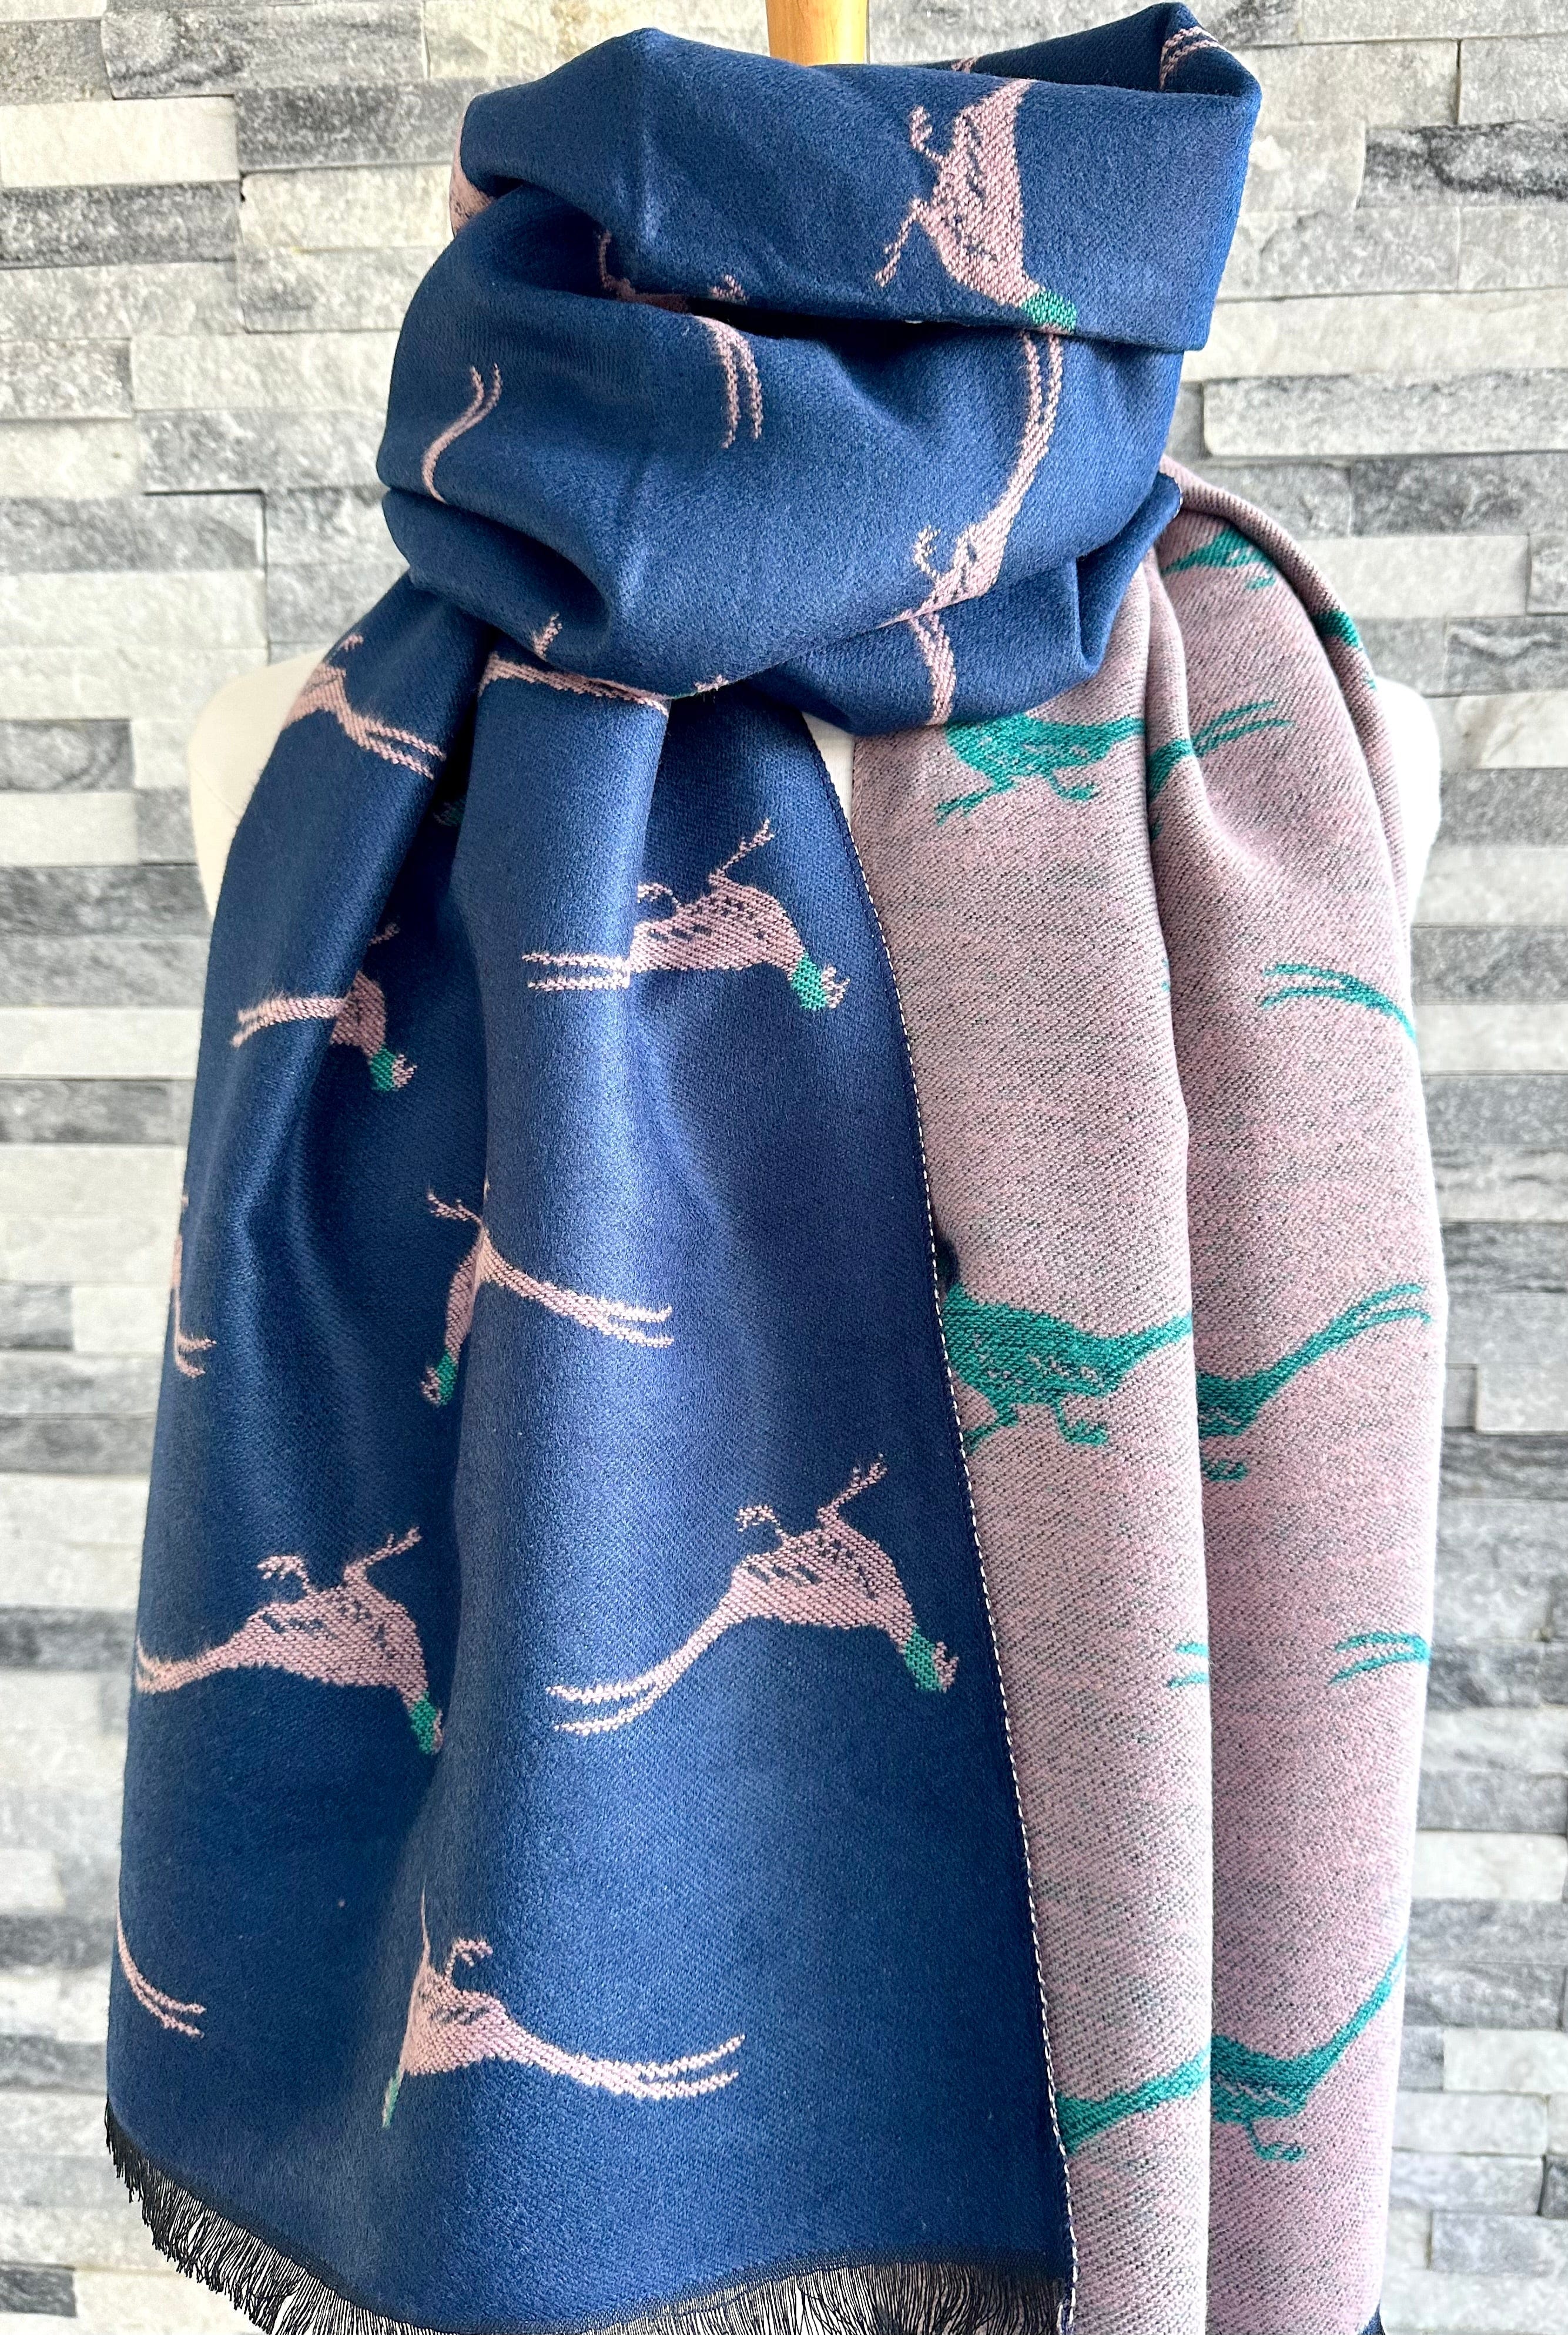 lusciousscarves Navy , Pink and Teal Reversible Scarf / Shawl With Pheasants Design